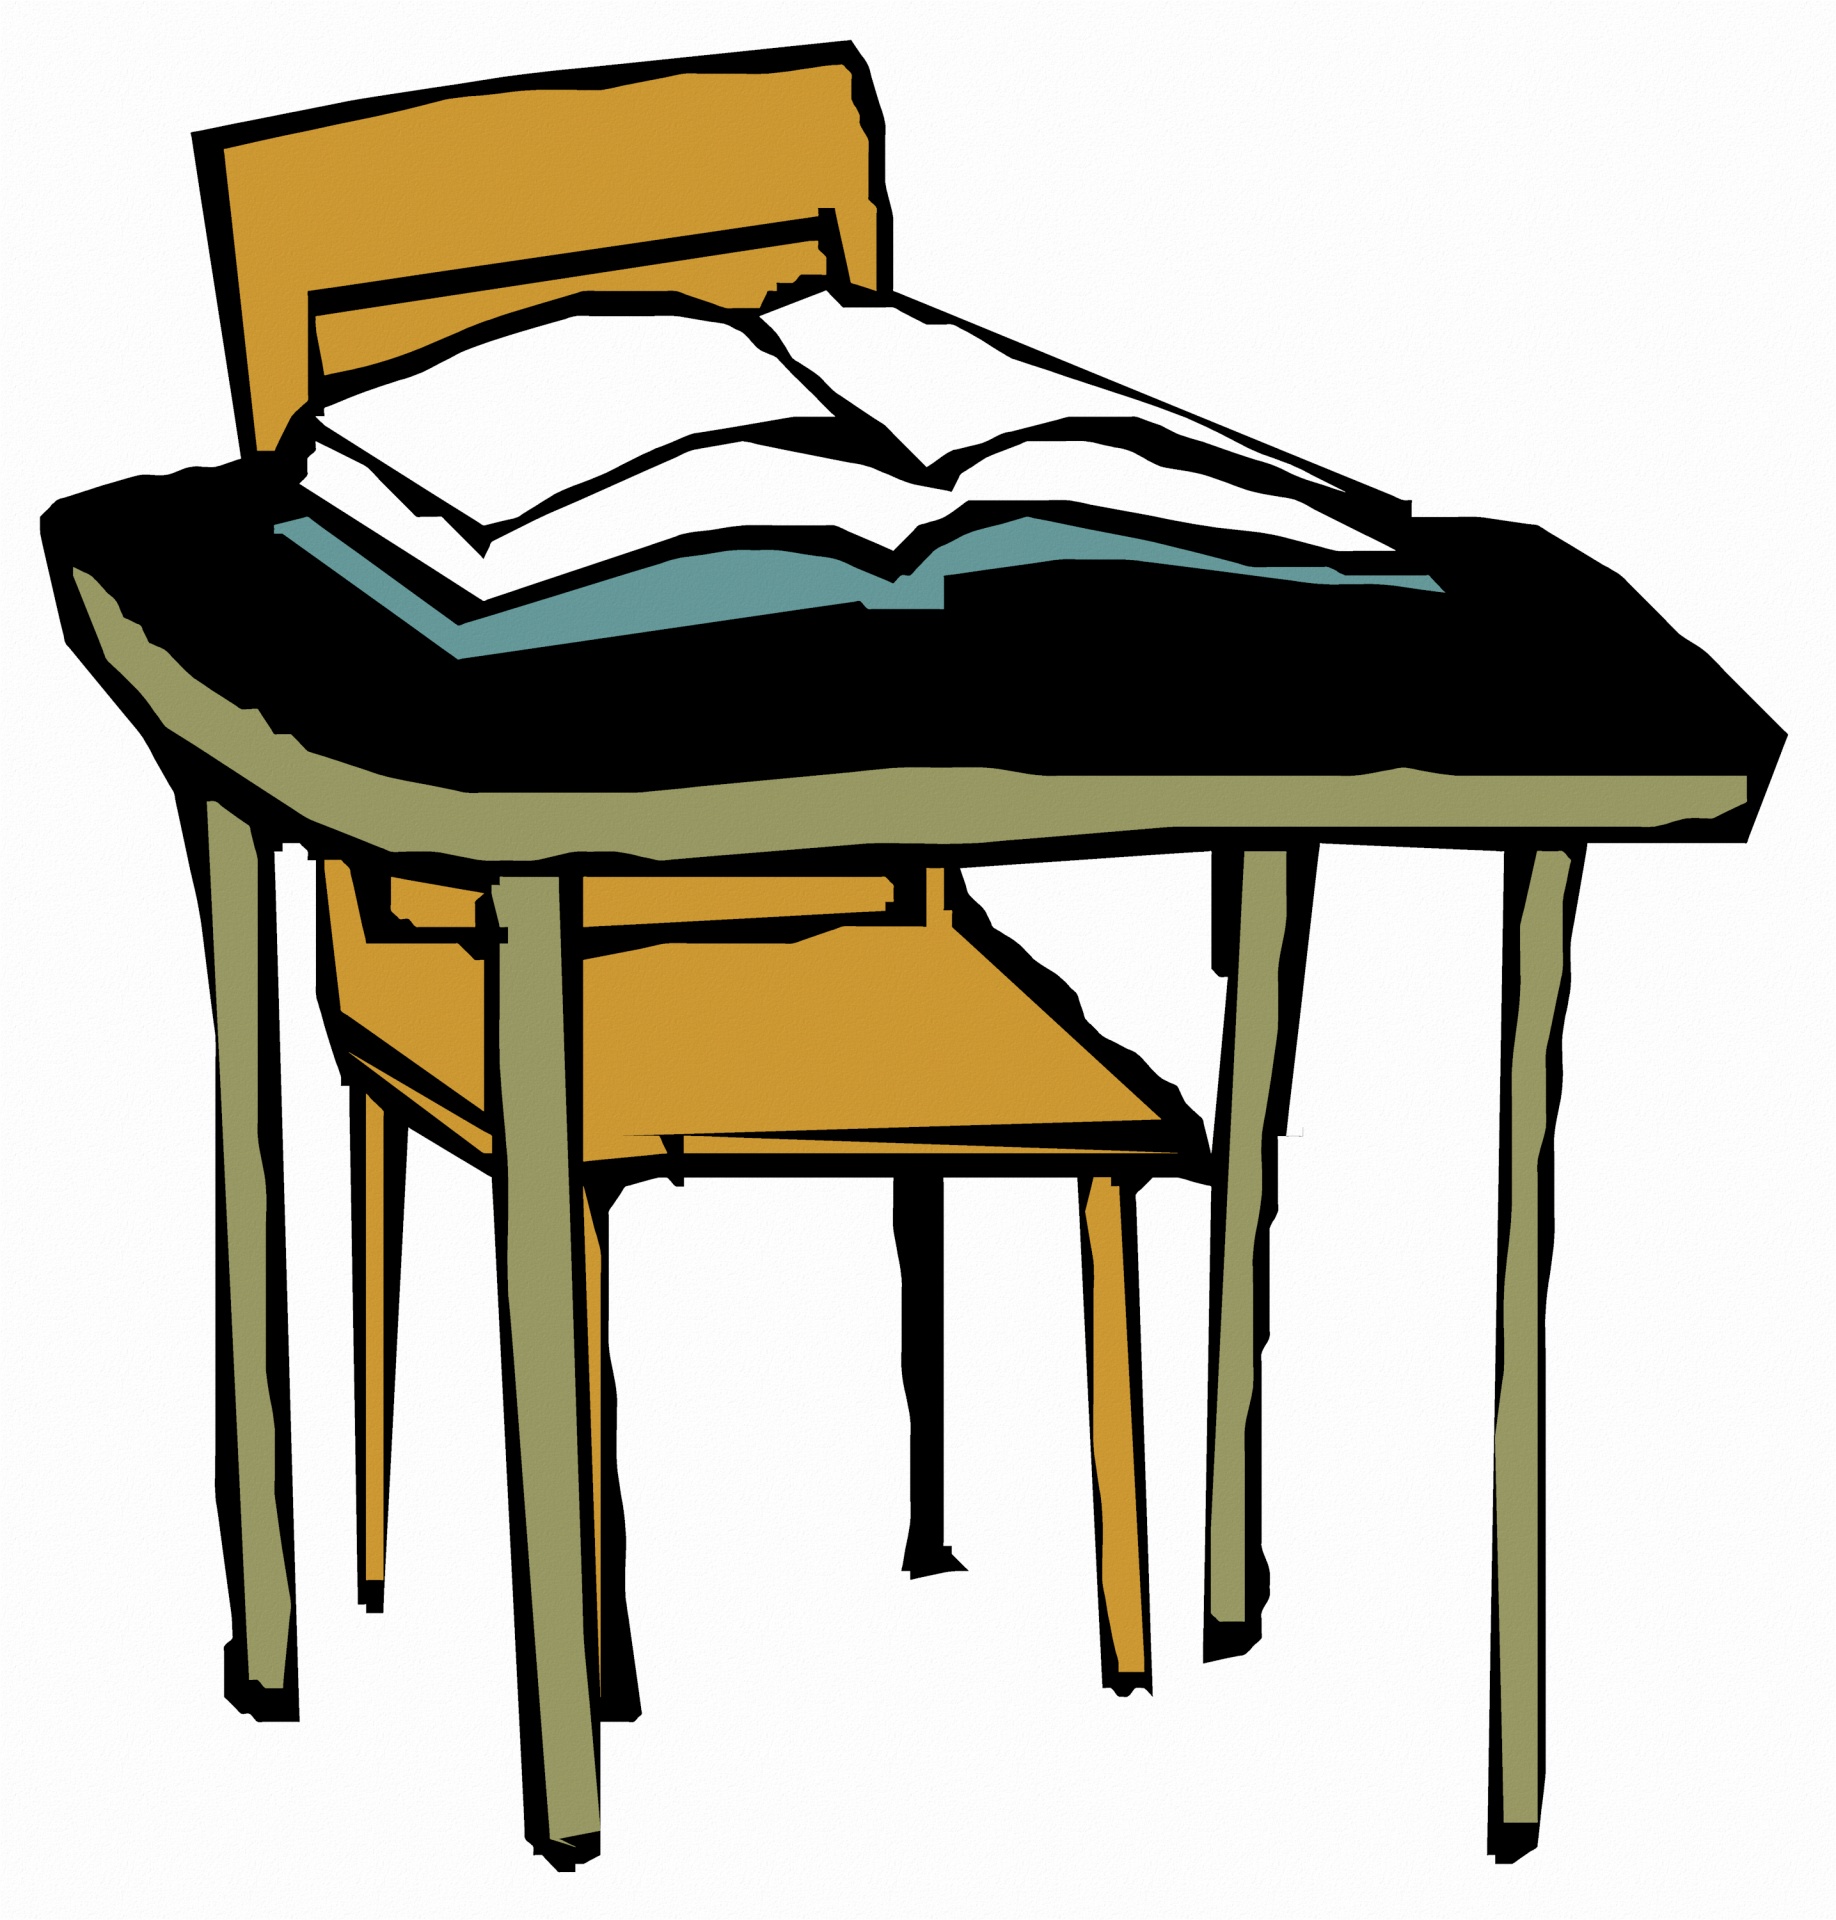 clipart book on the table - photo #16